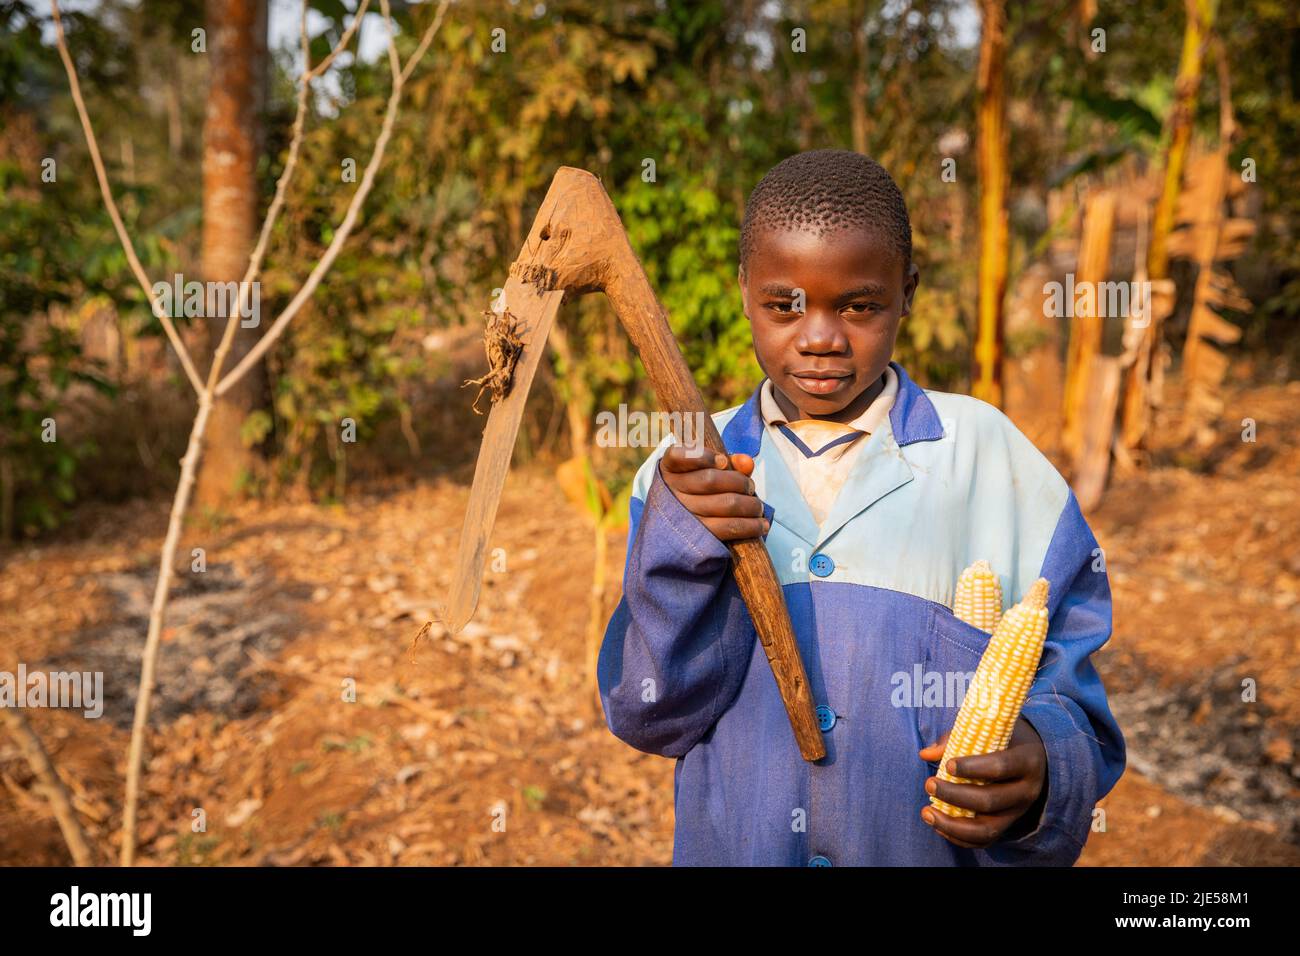 A young farmer child with a hoe in his hand and a cob of corn, African children and work in the fields Stock Photo